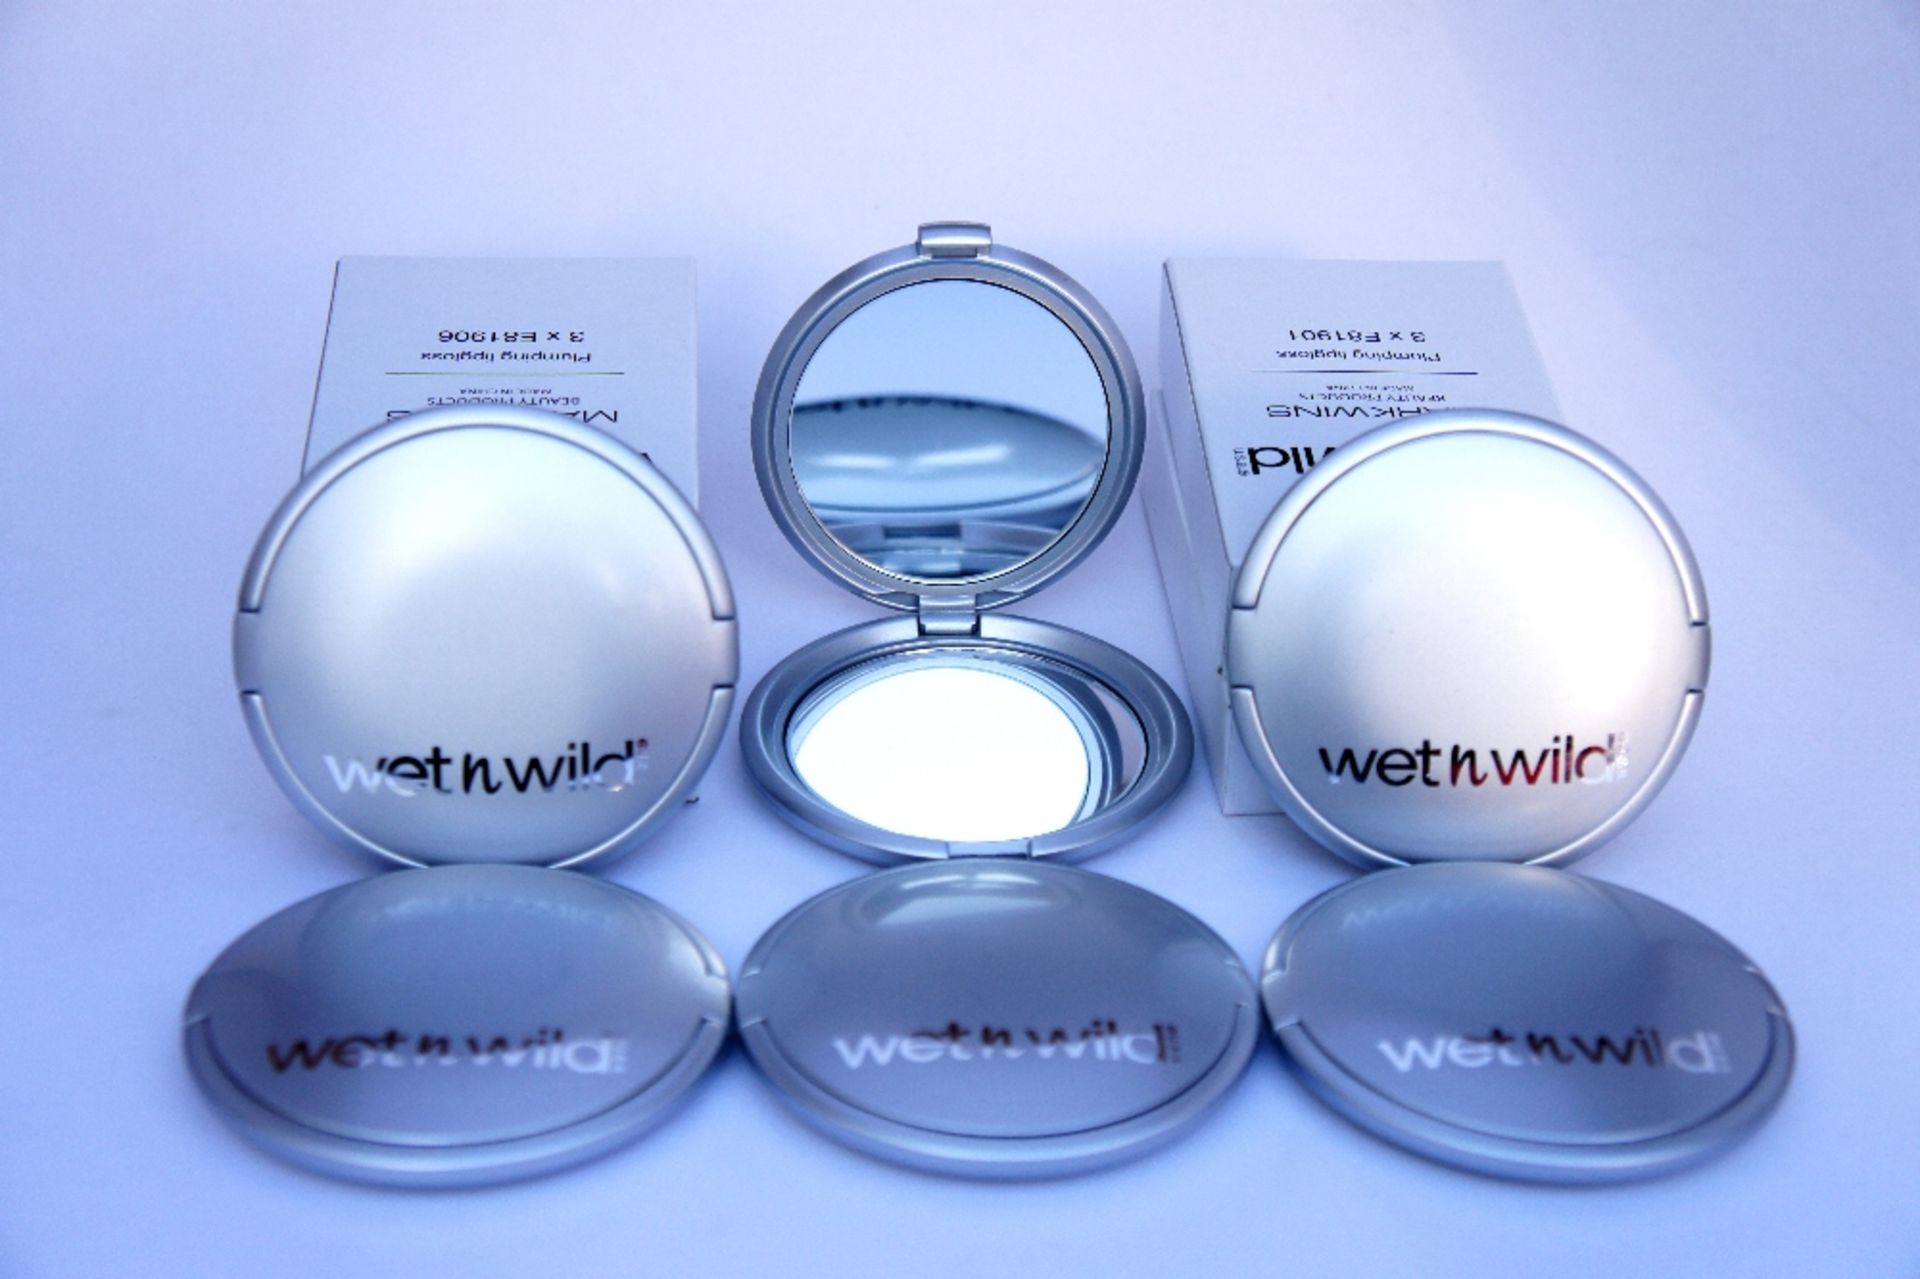 72 x Wet N Wild Mirror Compacts – includes 3x magnifying mirror – NO VAT – UK Delivery £15